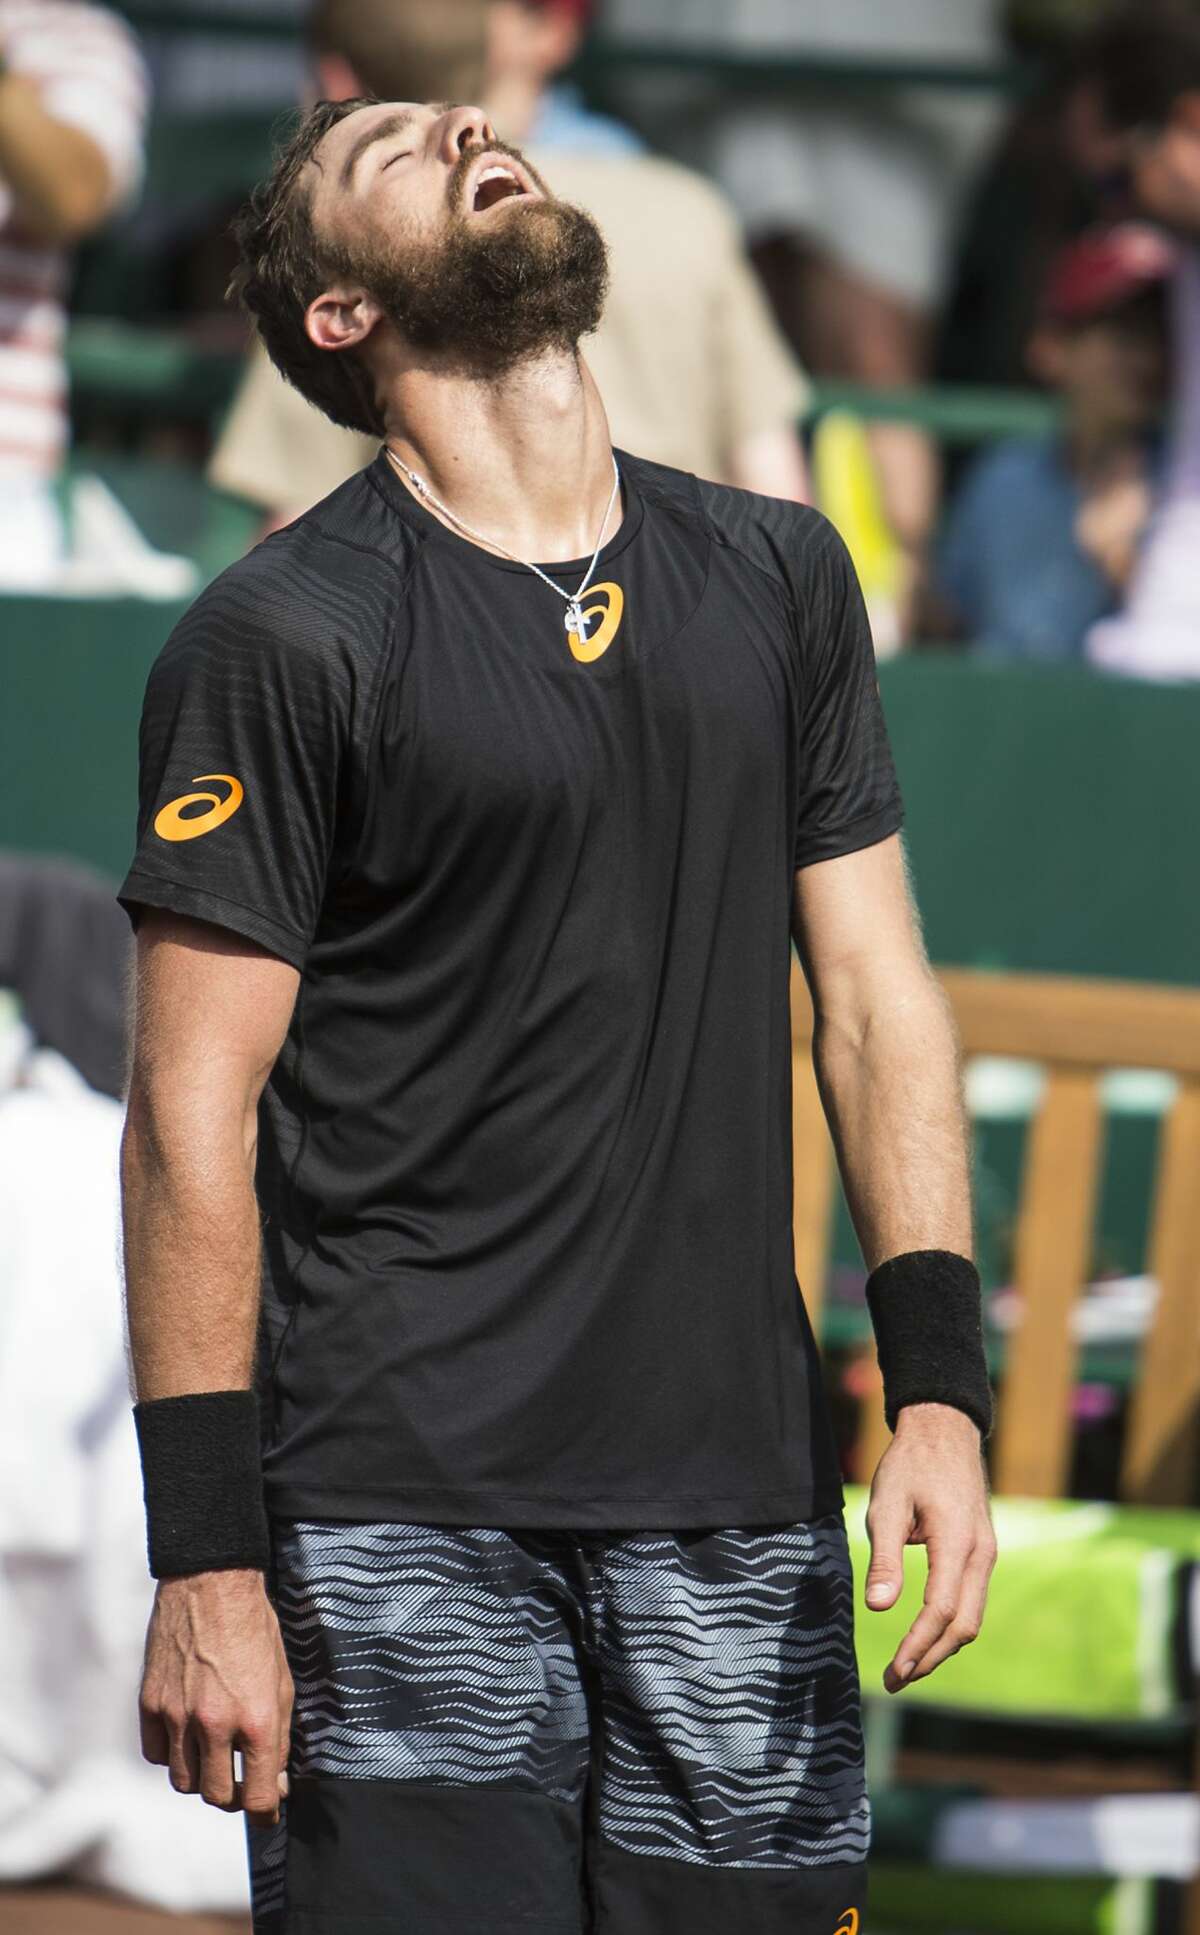 Steve Johnson reacts after defeating Thomaz Bellucci in the championship singles match of the U.S. Men's Clay Court Championship tennis tournament at River Oaks Country Club on Sunday, April 16, 2017, in Houston. Johnson won 6-4, 4-6, 7-6 (5). (Brett Coomer / Houston Chronicle via AP)